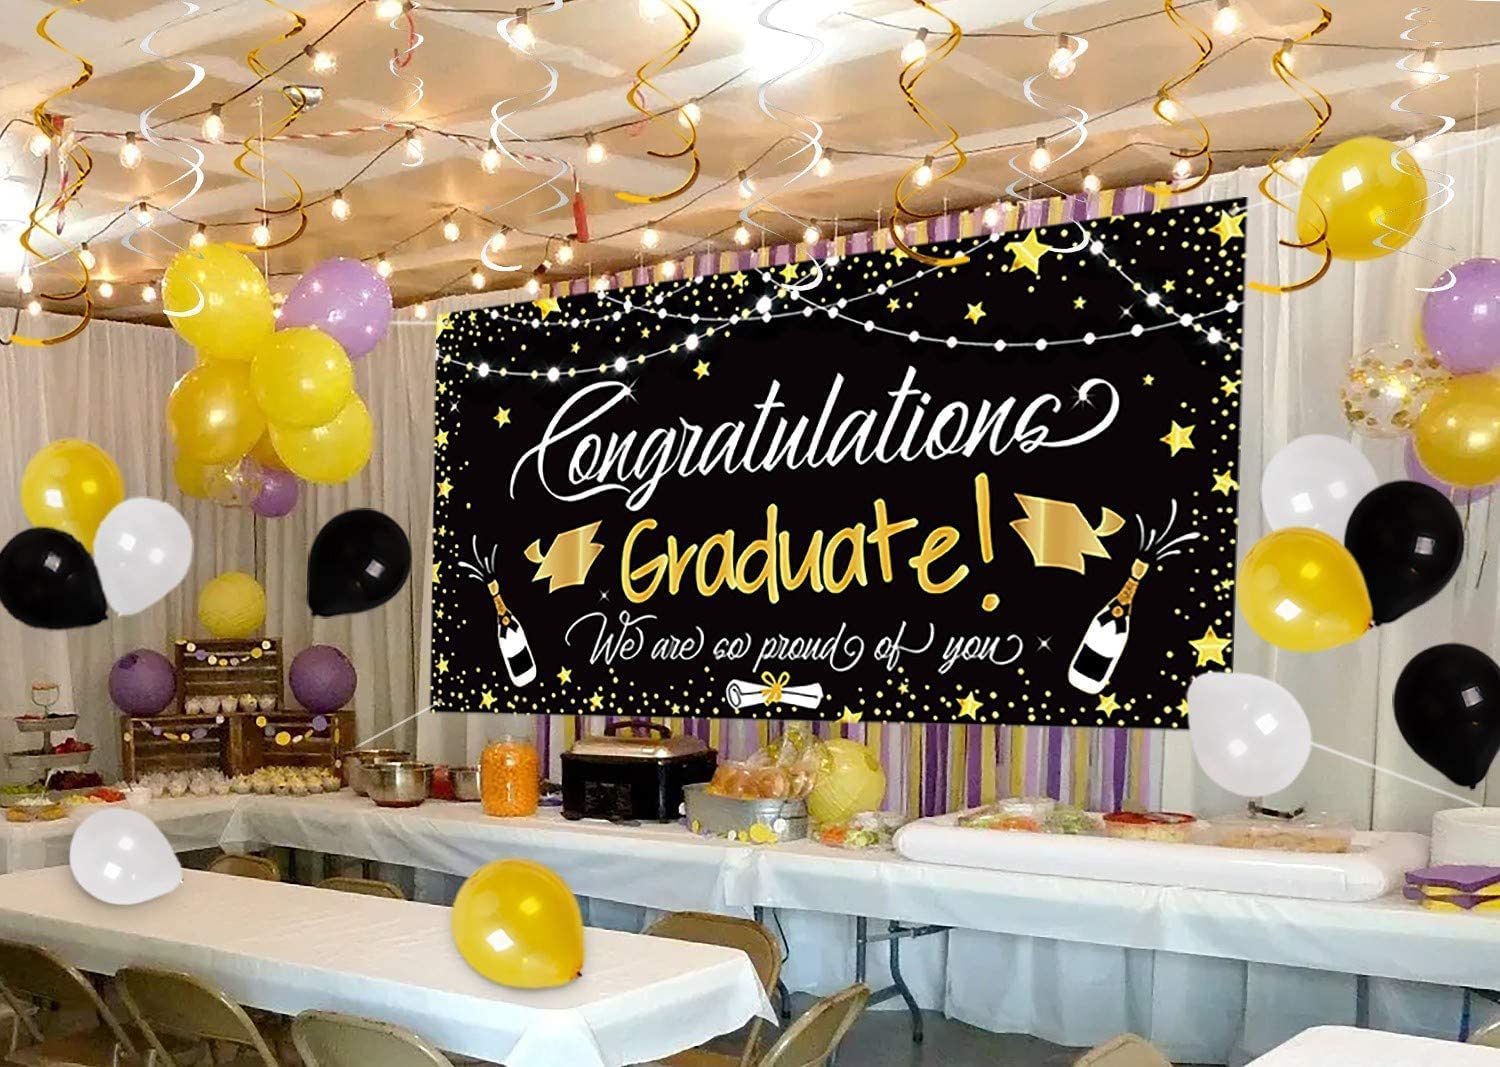 Graduation party poster and decorations, including balloons and a large background banner to congratulate the graduation